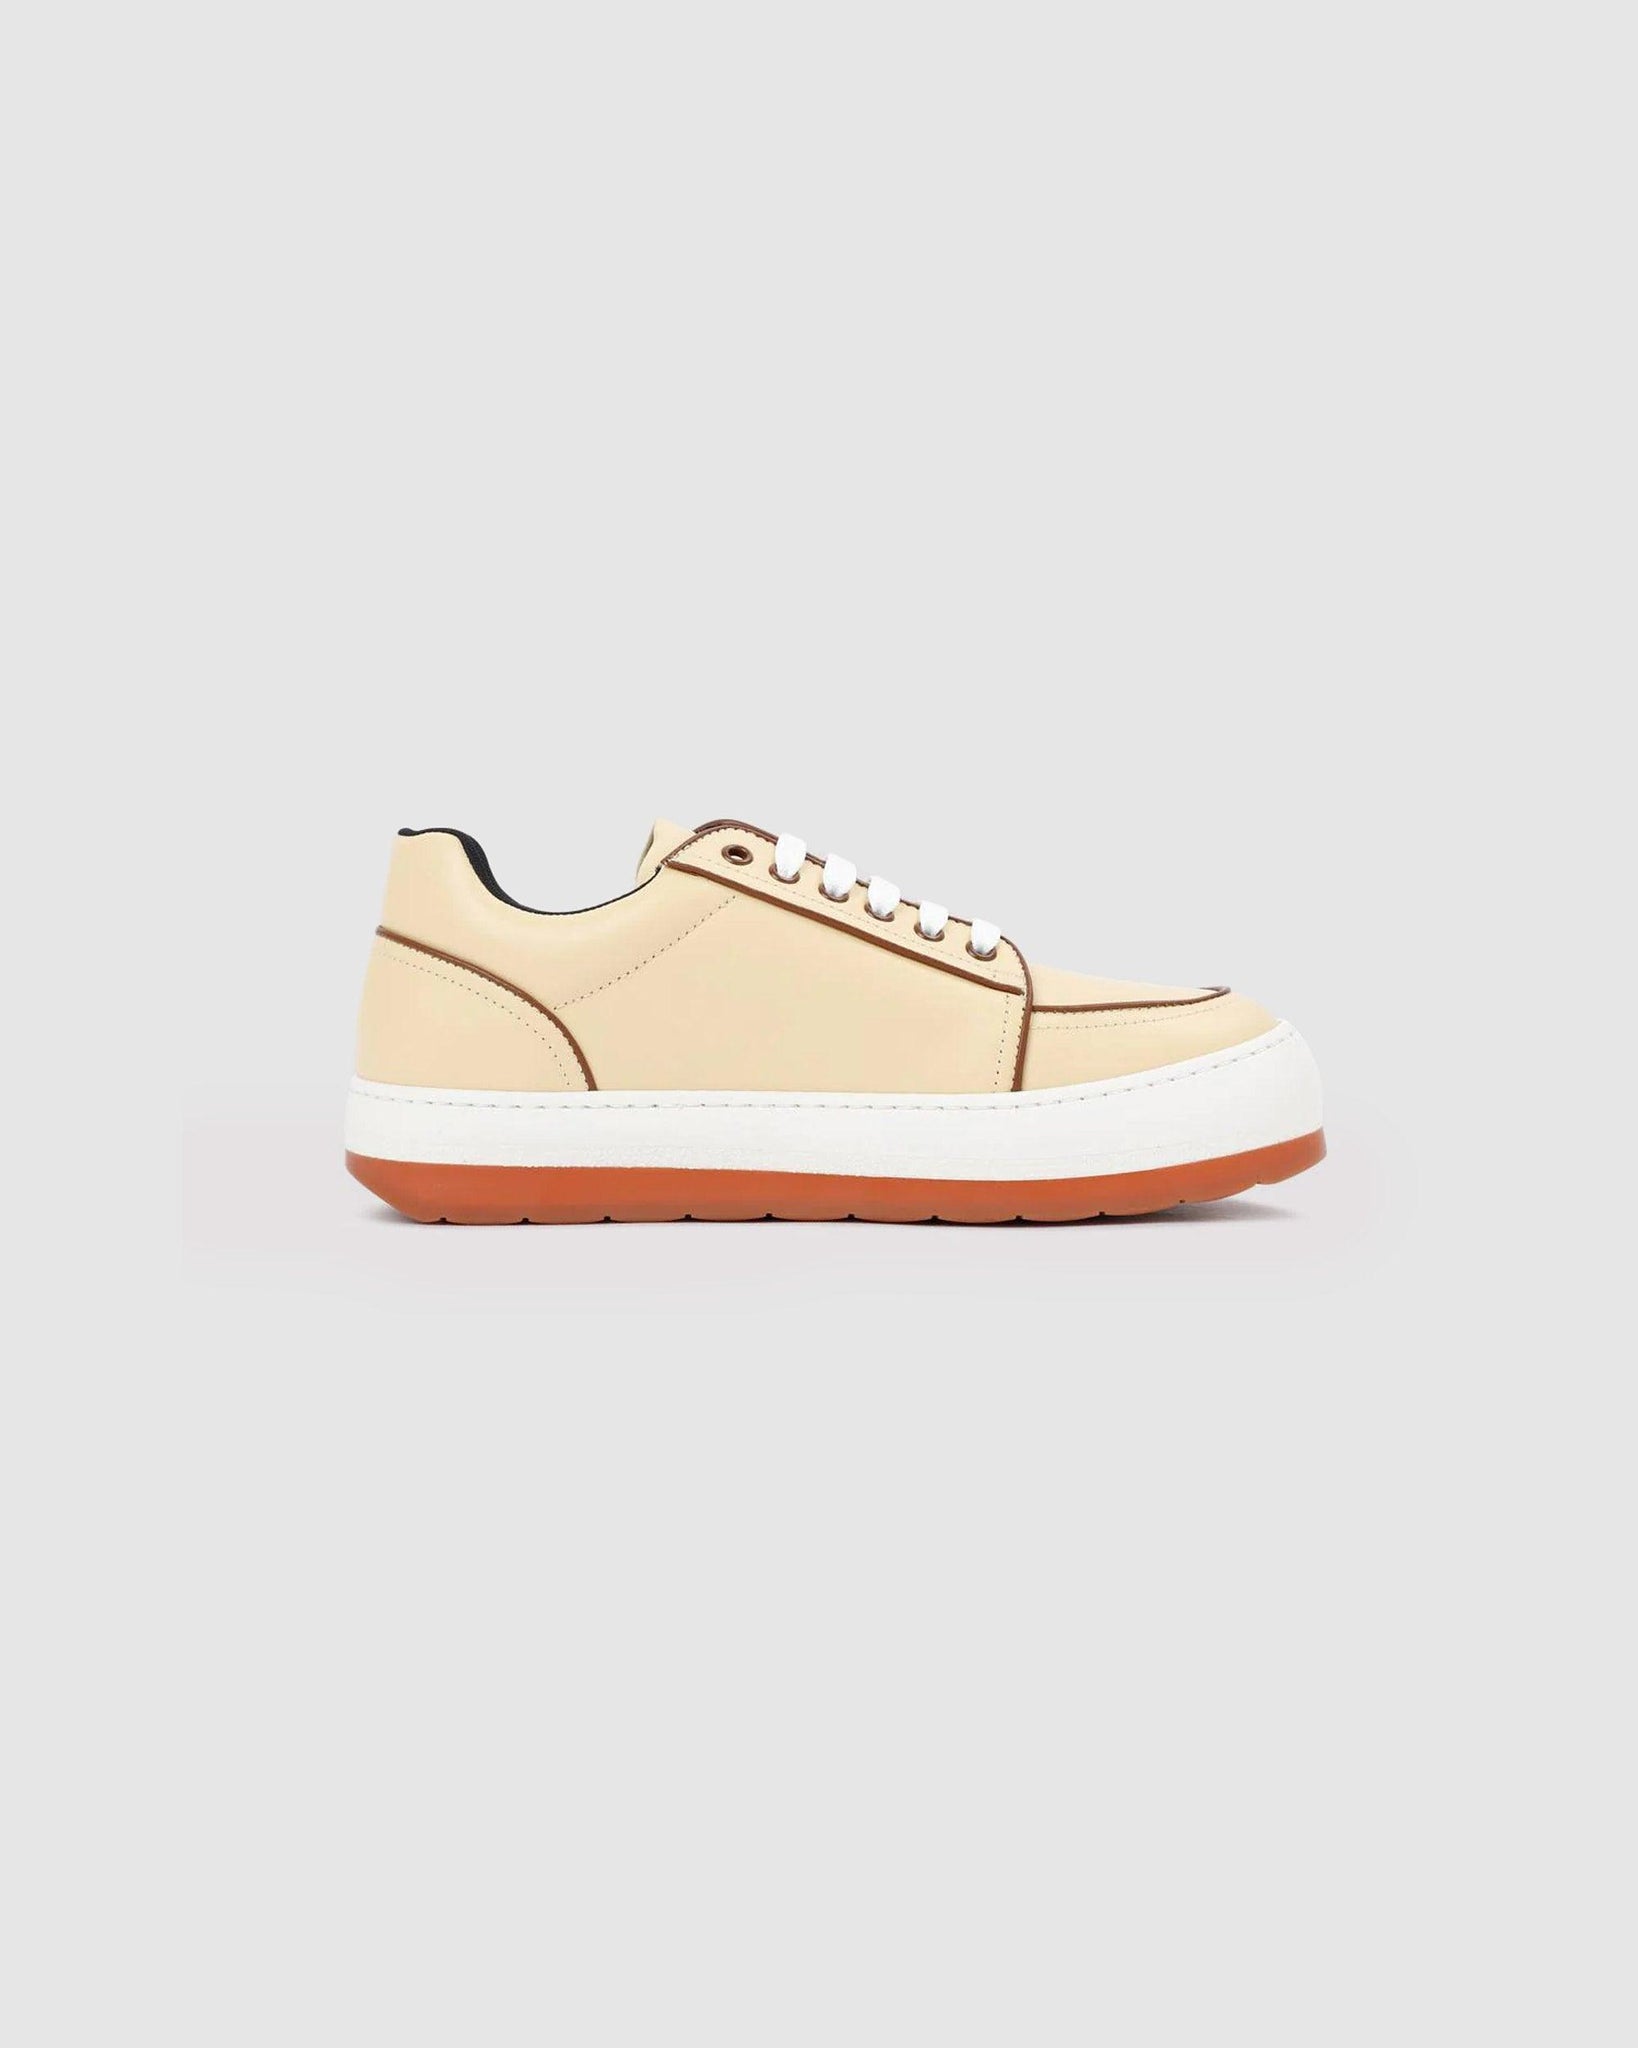 Dreamy Sneaker Cream - {{ collection.title }} - Chinatown Country Club 